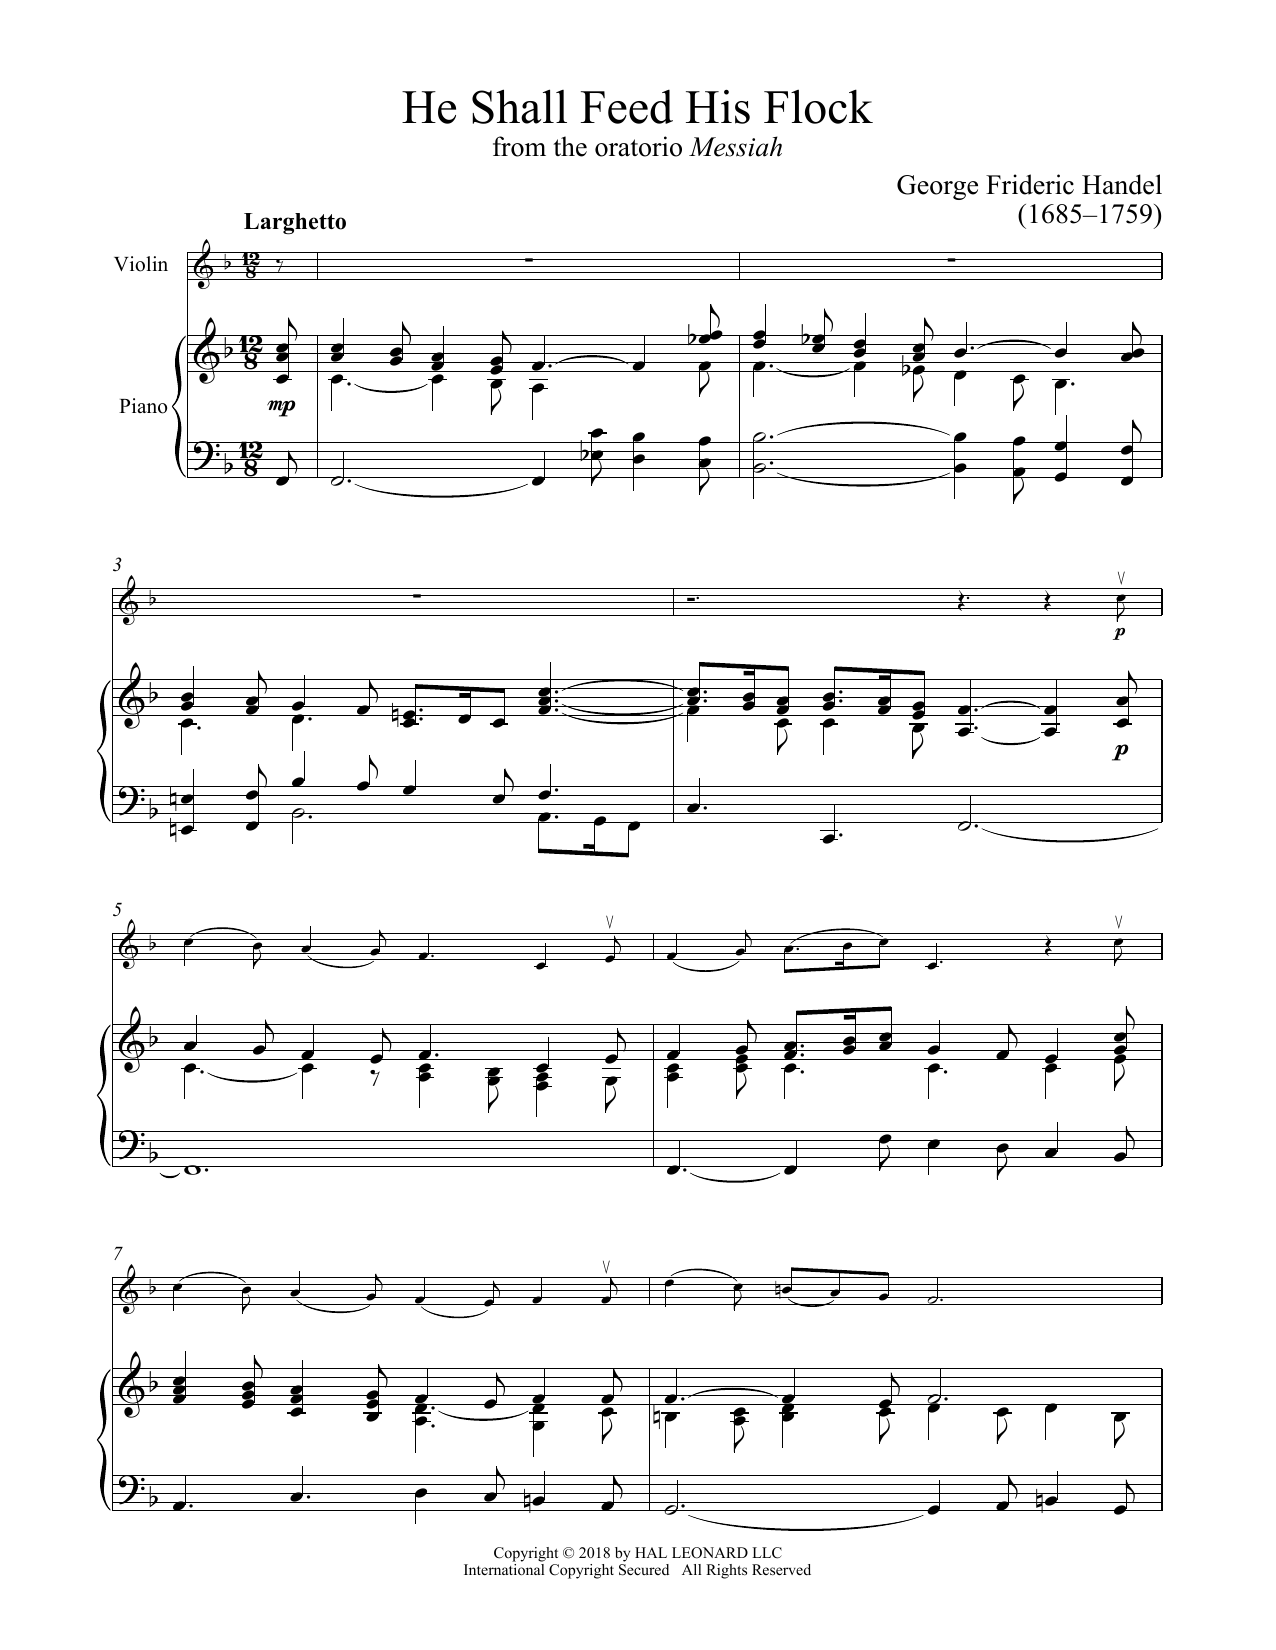 Download George Frideric Handel He Shall Feed His Flock Sheet Music